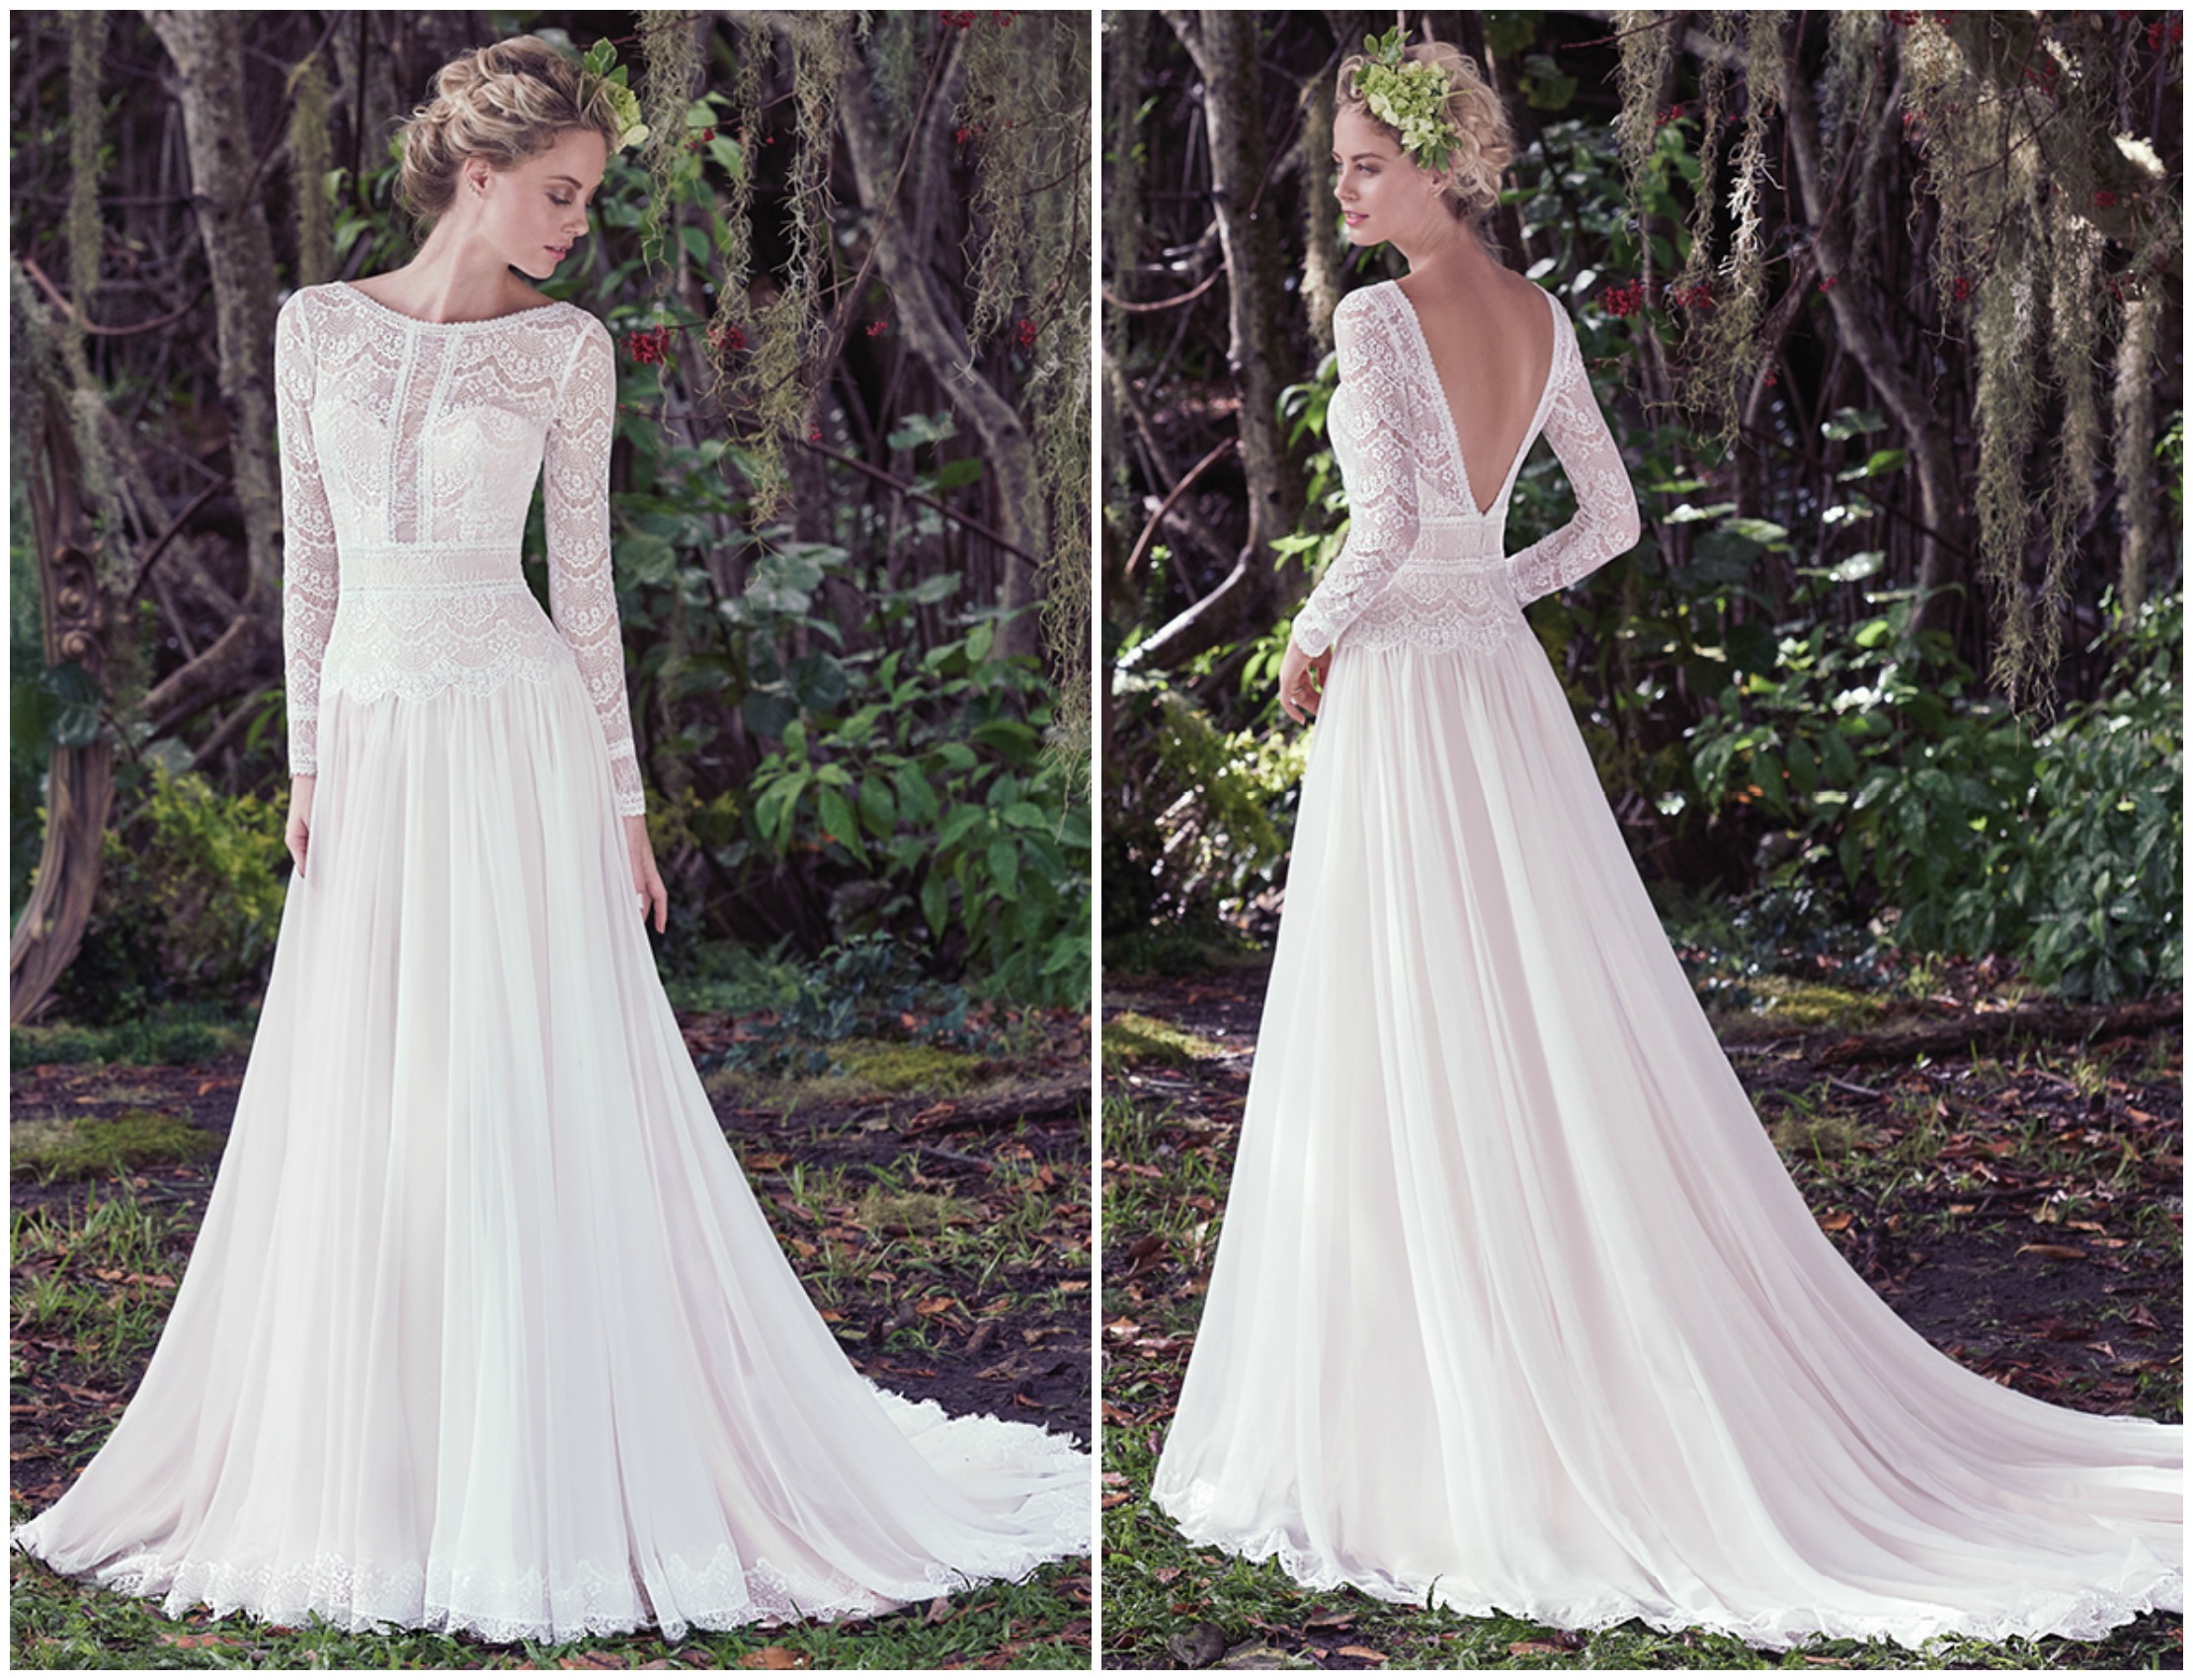 Understated elegance is found in this subtle lace and Santorini chiffon A-line wedding dress, complete with bateau neckline and long sleeves. Illusion lace details and stunning V-back create a sweet-yet-sexy style. Finished with zipper closure. 

<a href="https://www.maggiesottero.com/maggie-sottero/deirdre/9726" target="_blank">Maggie Sottero</a>